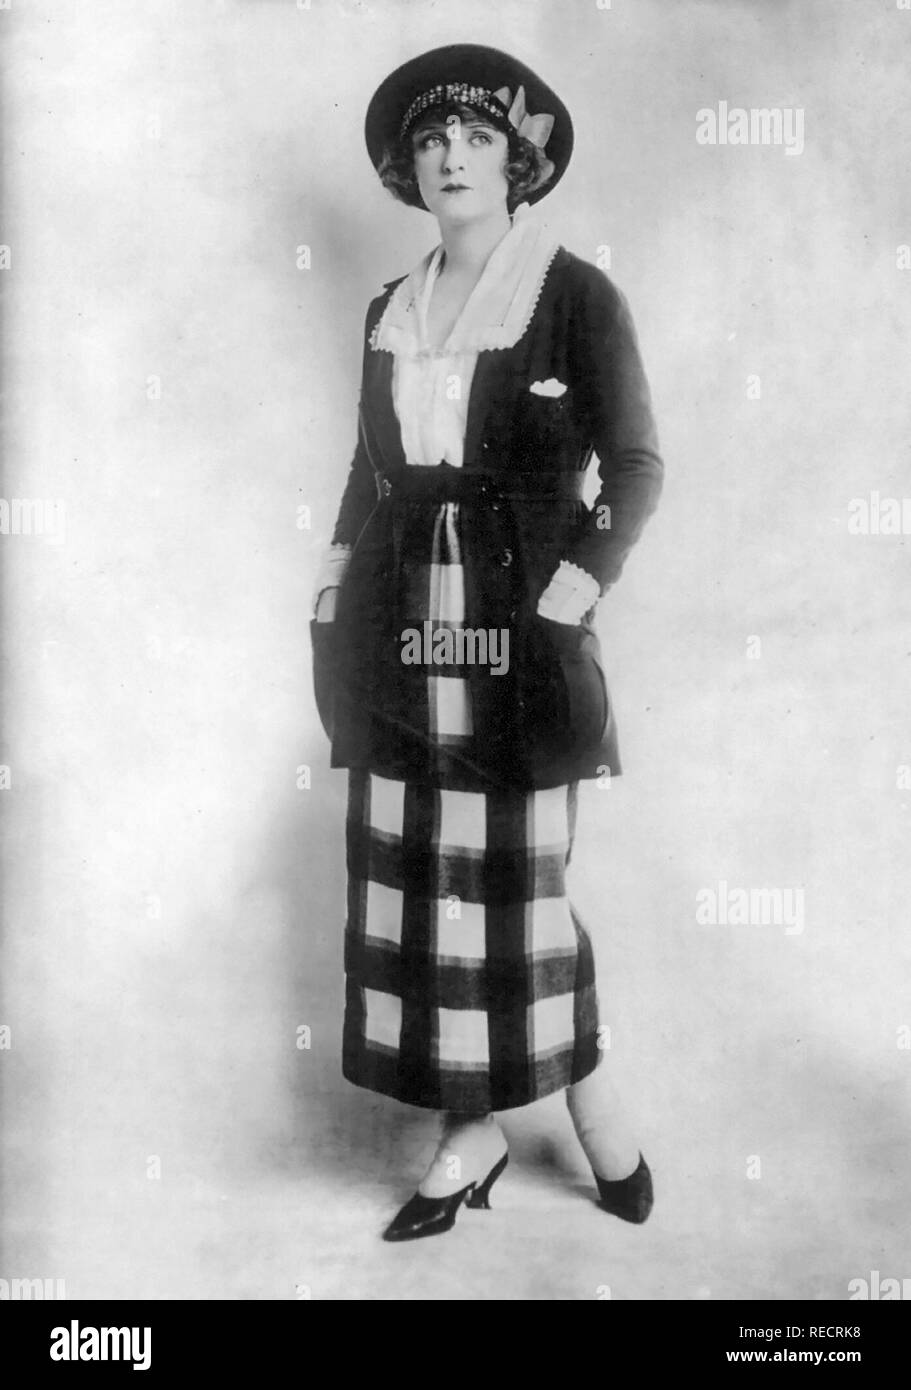 Clothing, suit, vintage Black and White Stock Photos & Images - Alamy